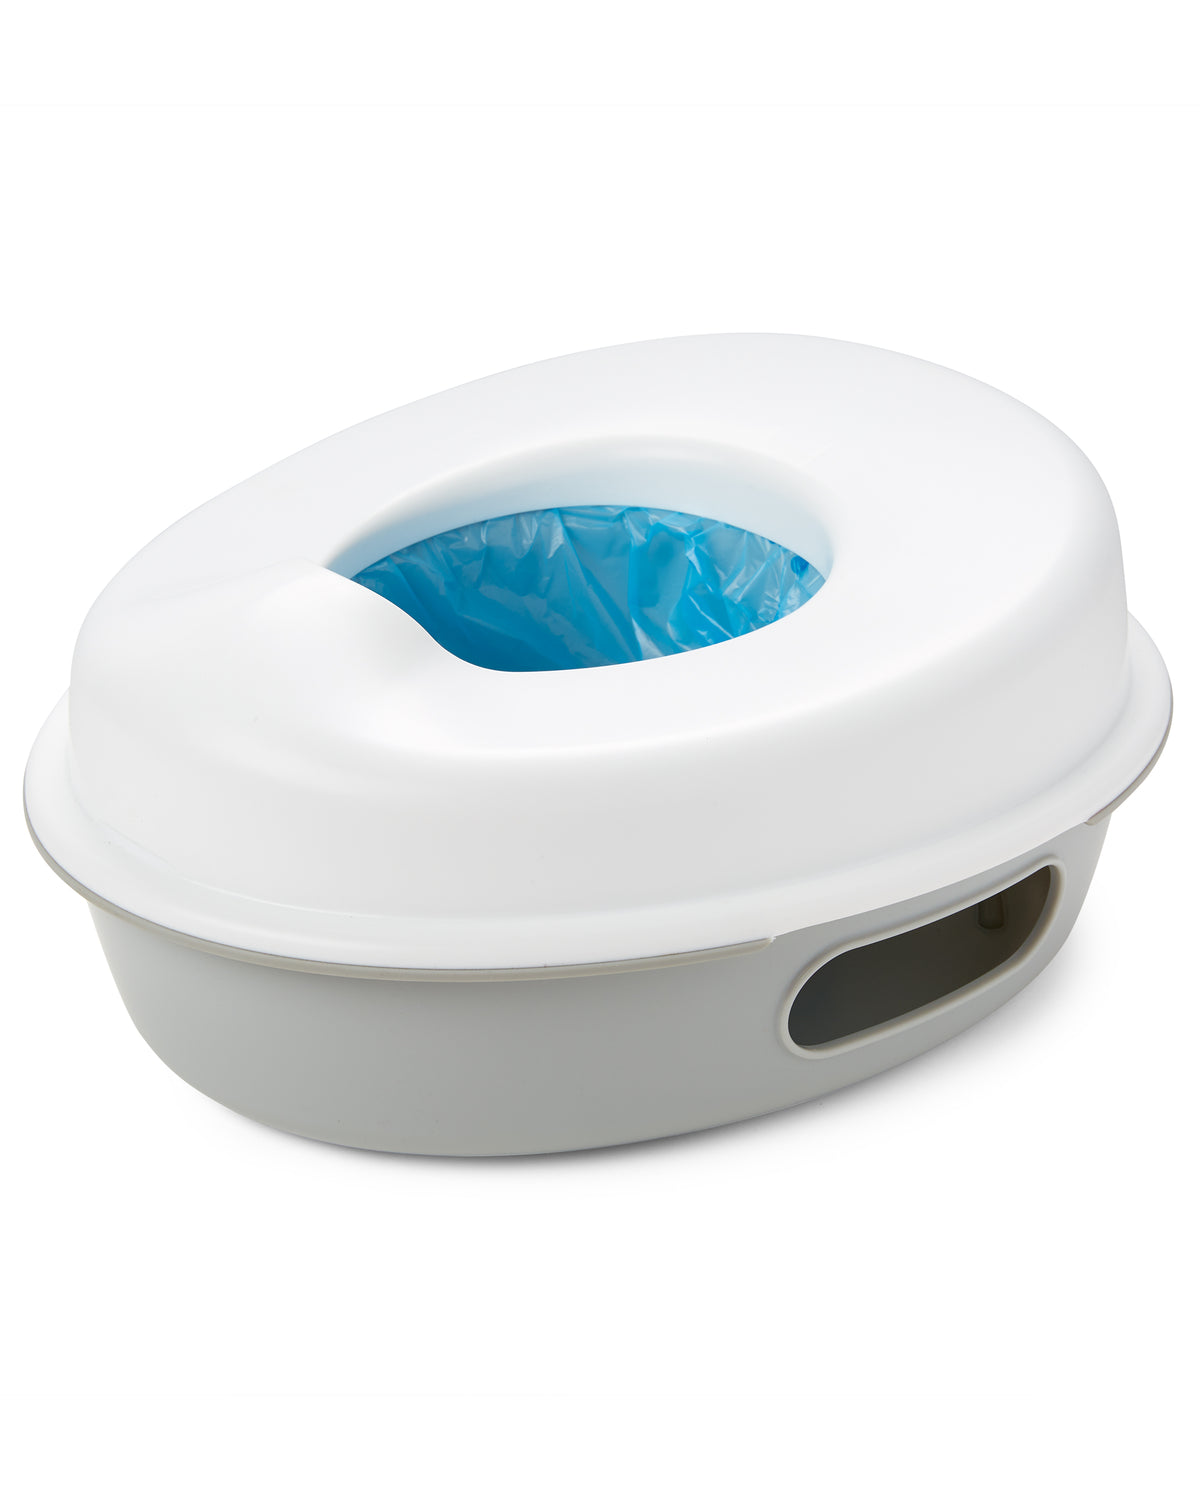 Skip Hop Go Time 3 in 1 Potty